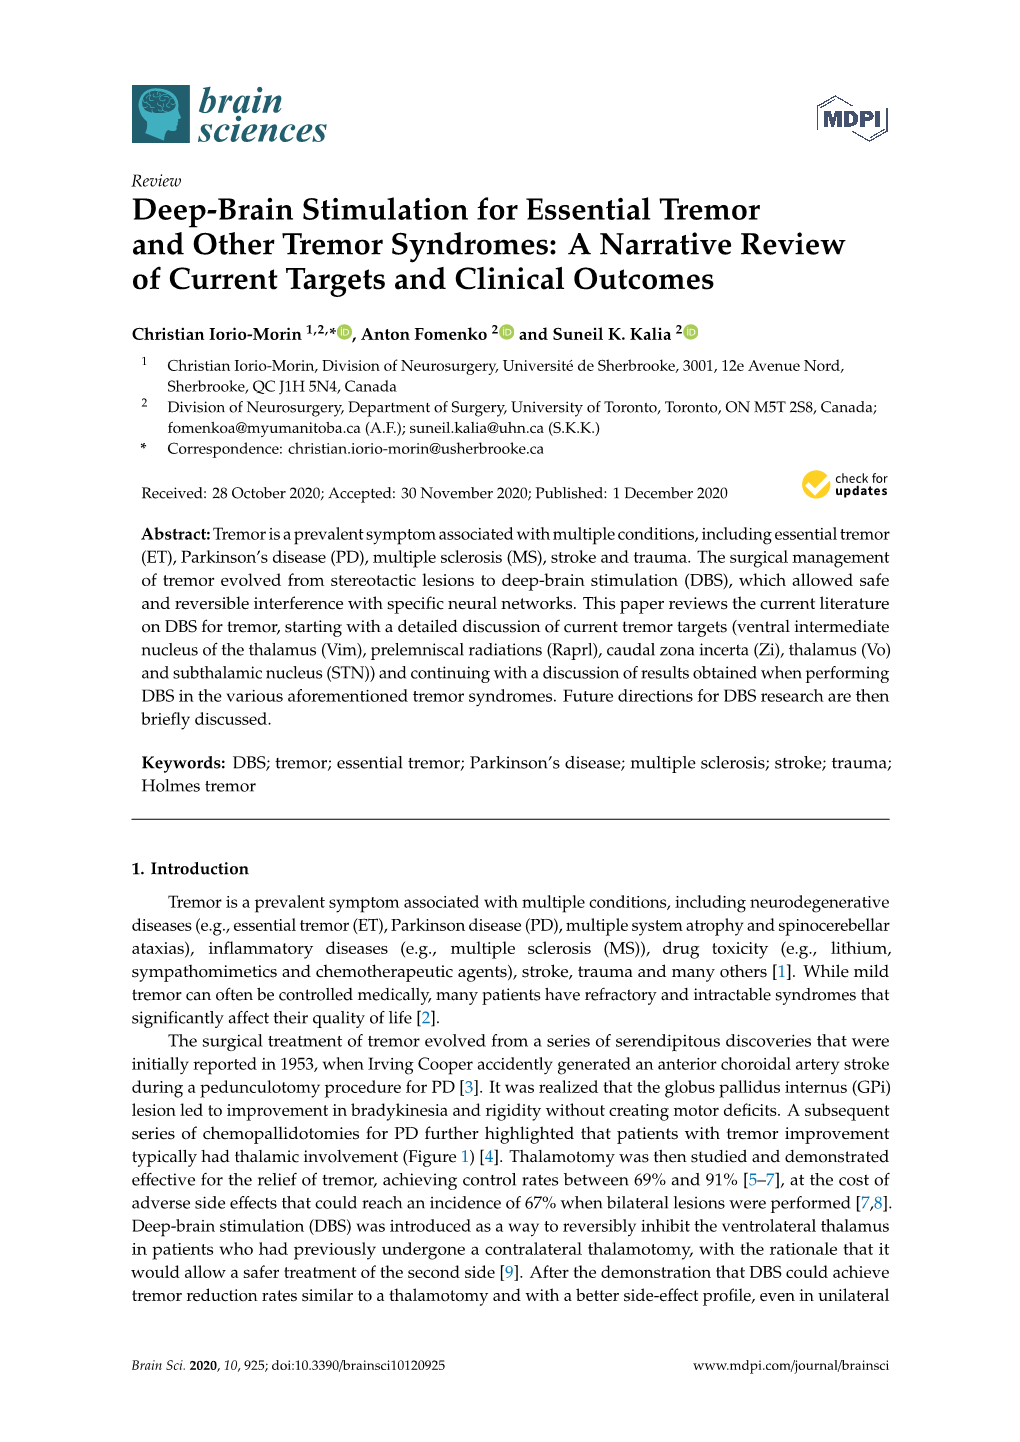 Deep-Brain Stimulation for Essential Tremor and Other Tremor Syndromes: a Narrative Review of Current Targets and Clinical Outcomes